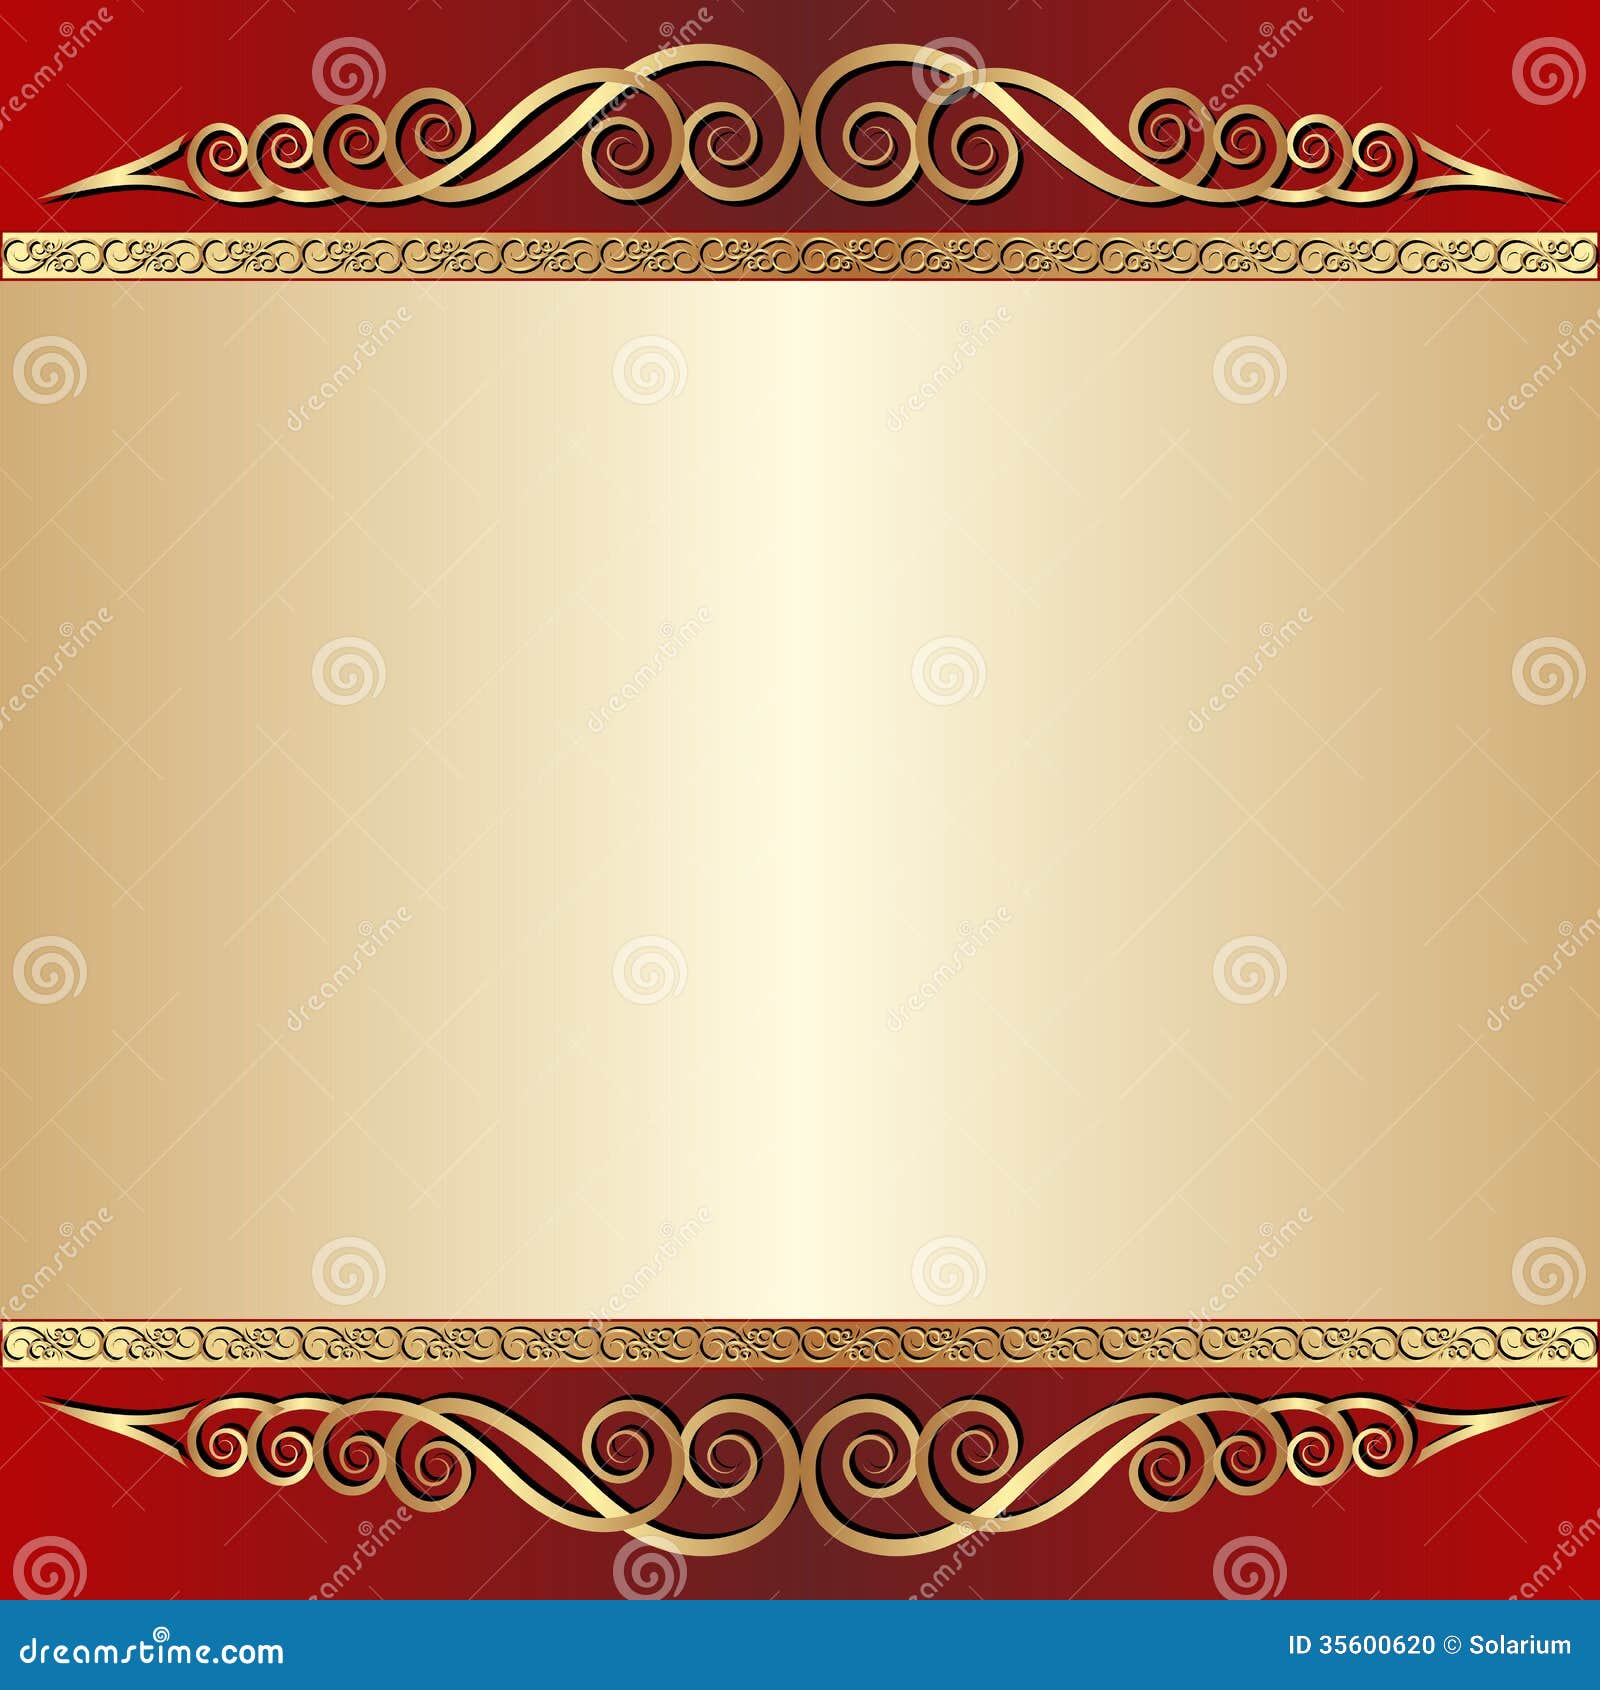 Red and gold background stock vector. Illustration of frame - 35600620